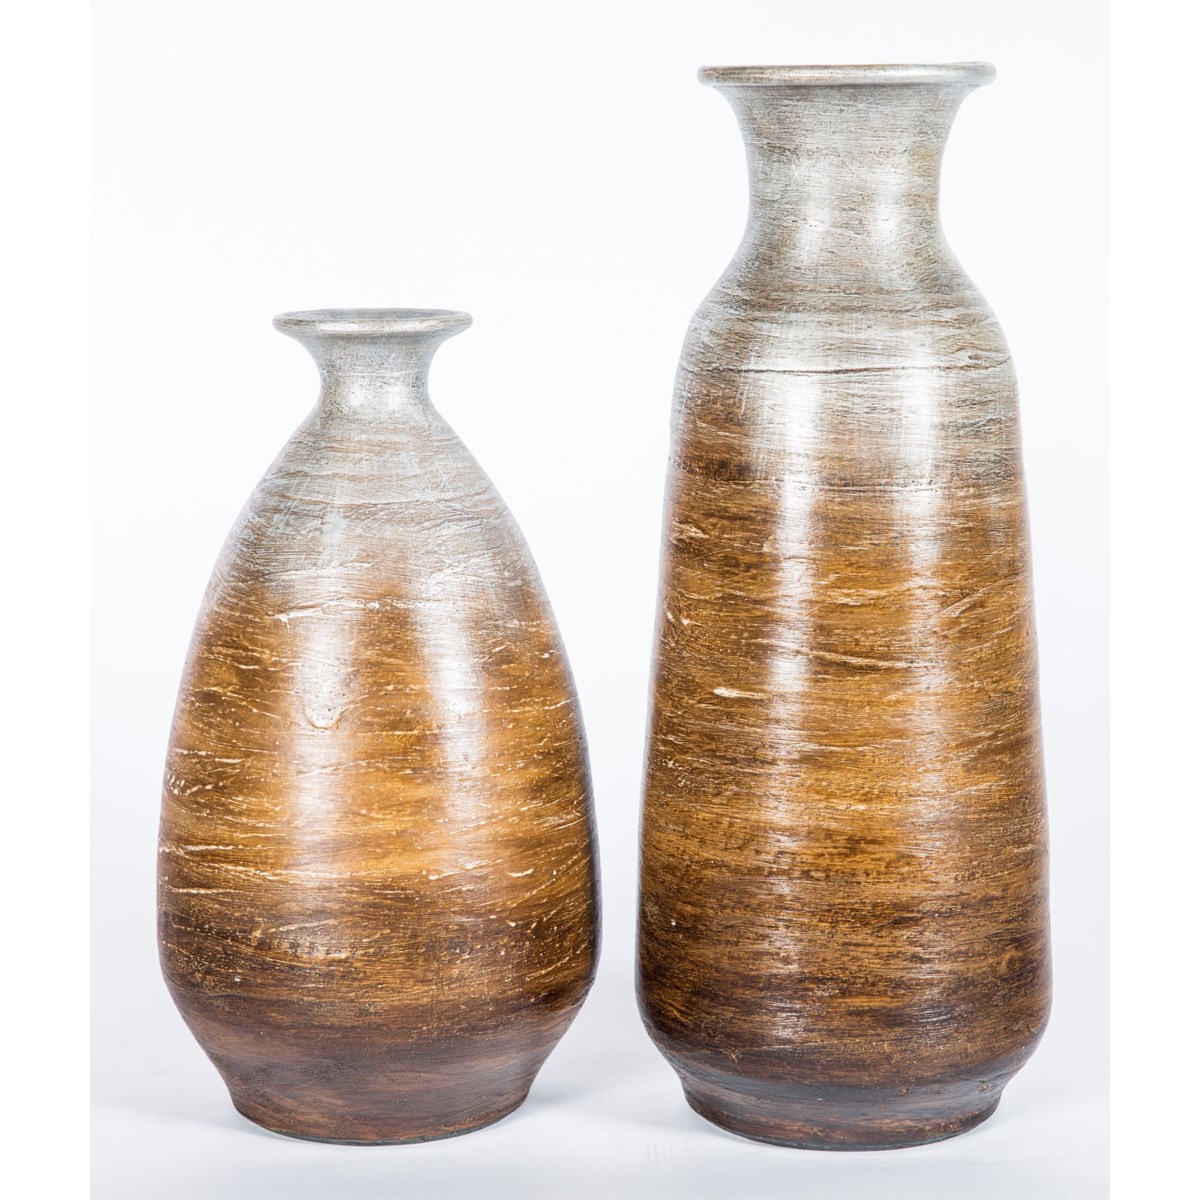 Large Vase in Cocoon Finish